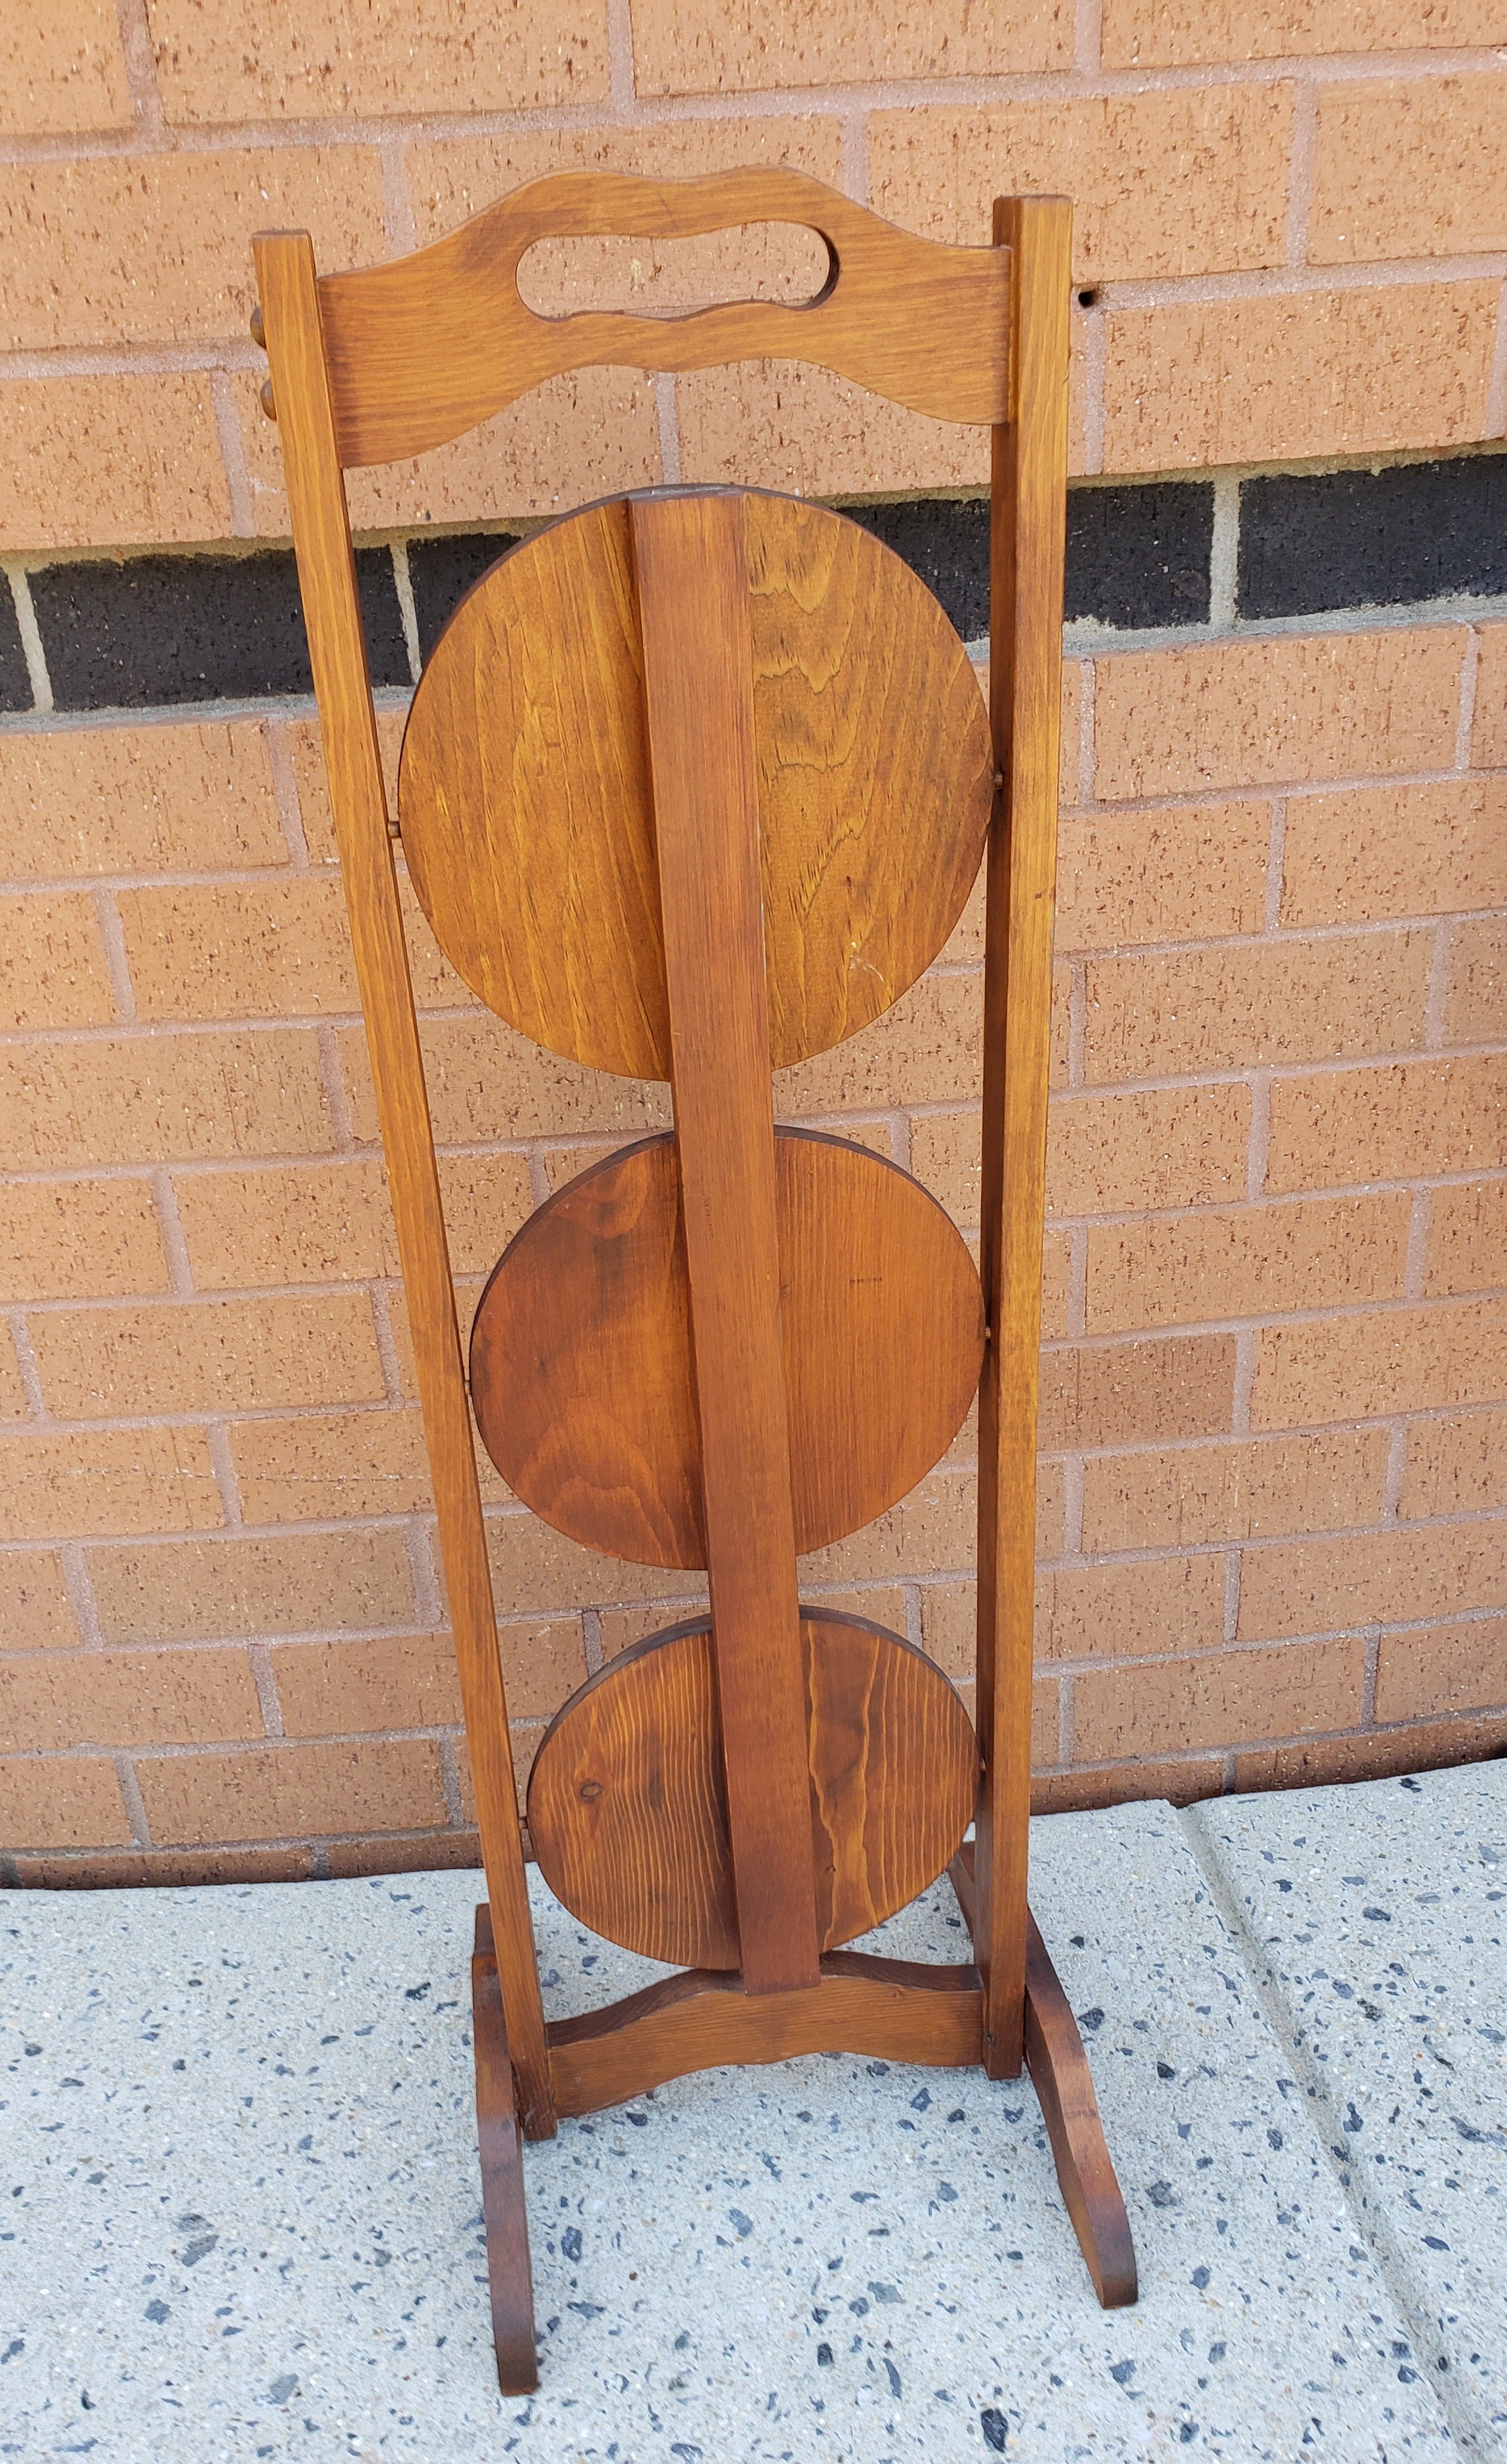 Folding Hand Painted Wood Muffin Stand In Good Condition For Sale In Germantown, MD